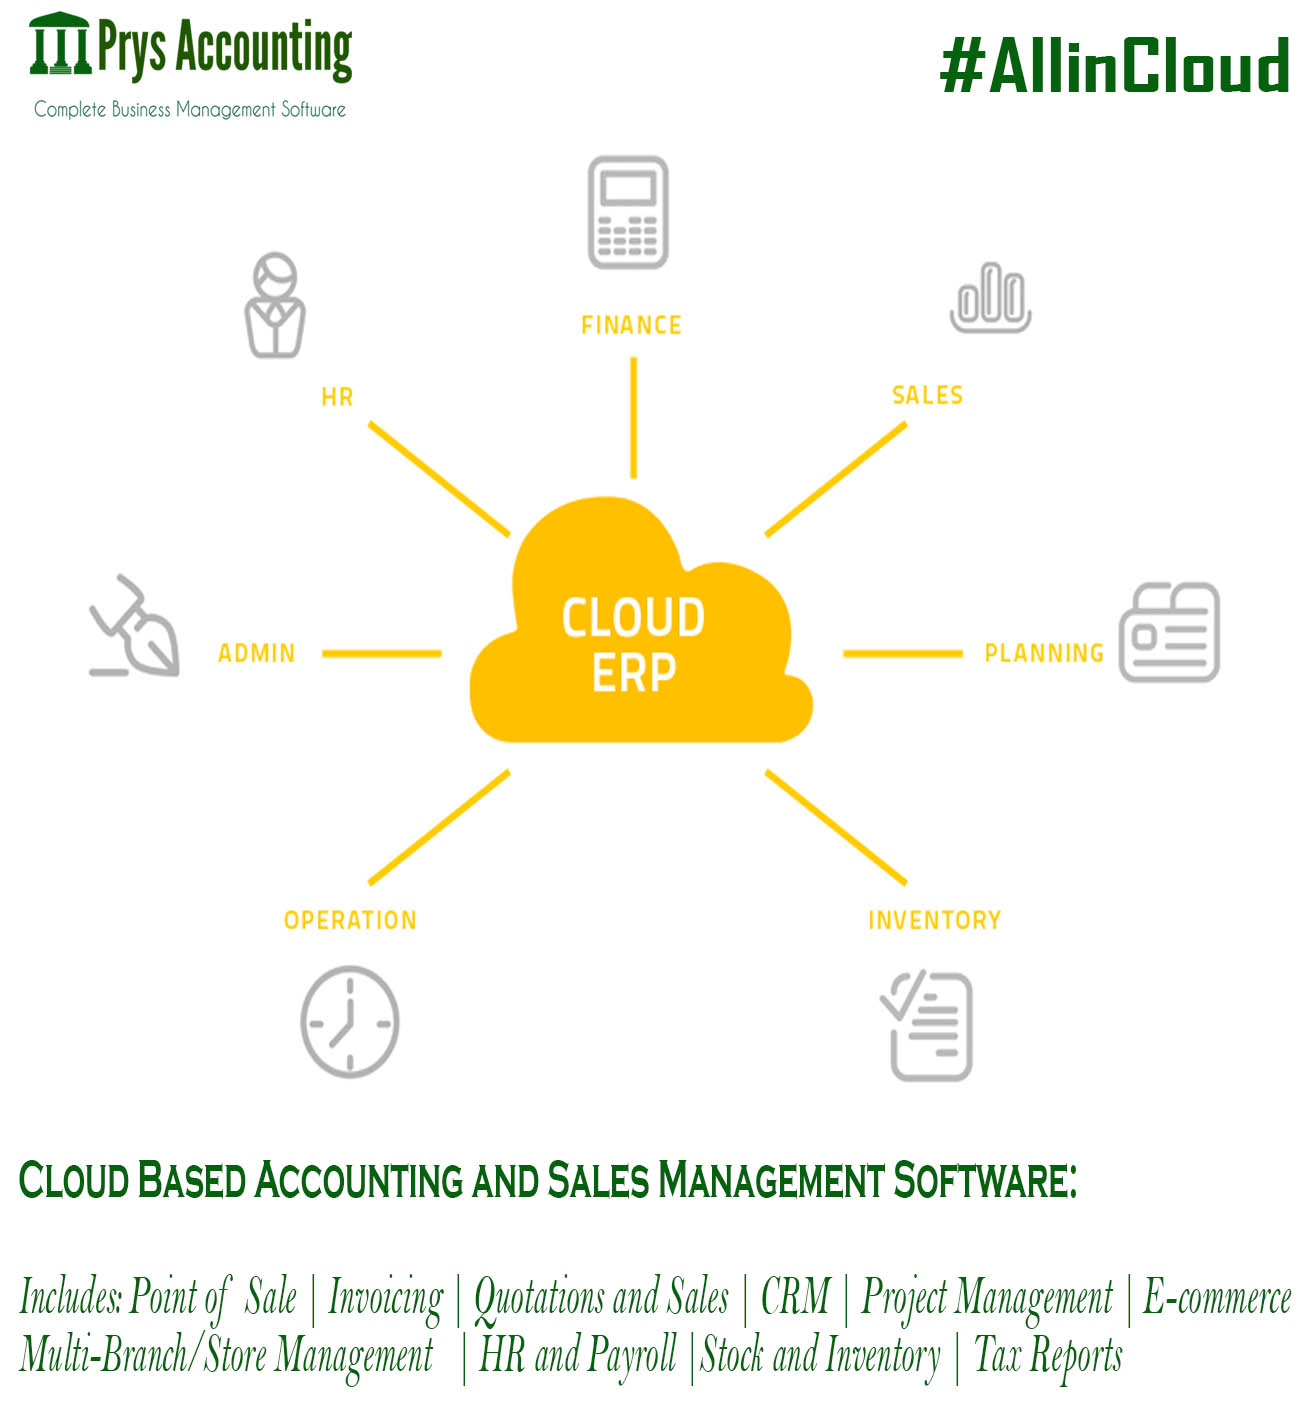 Cloud Accounting Software #AllinCloud (Annual Subscrition)